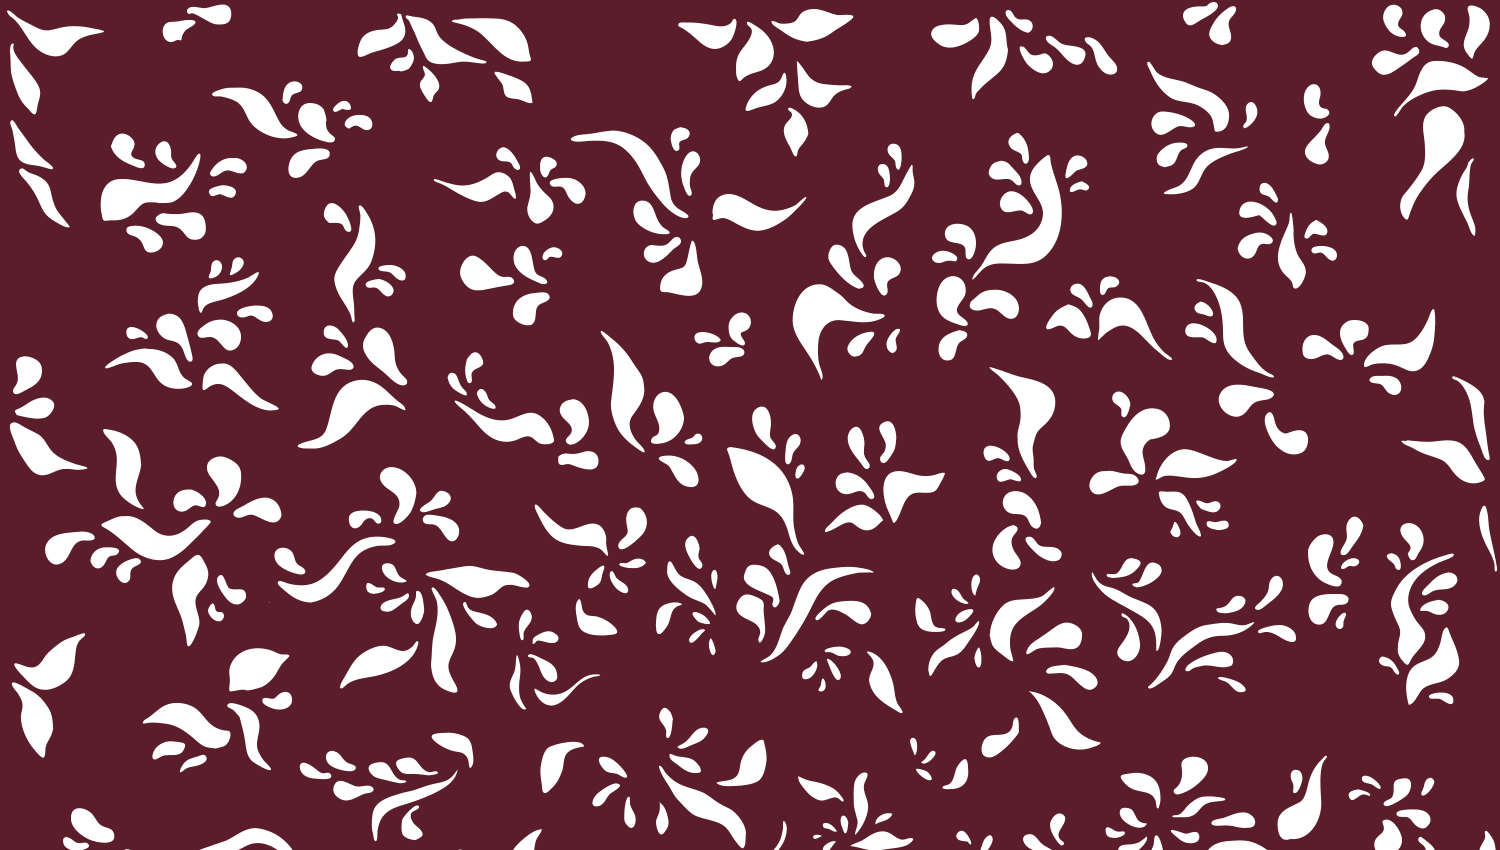 Parasoleil™ Agave© pattern displayed with a burgundy color overlay